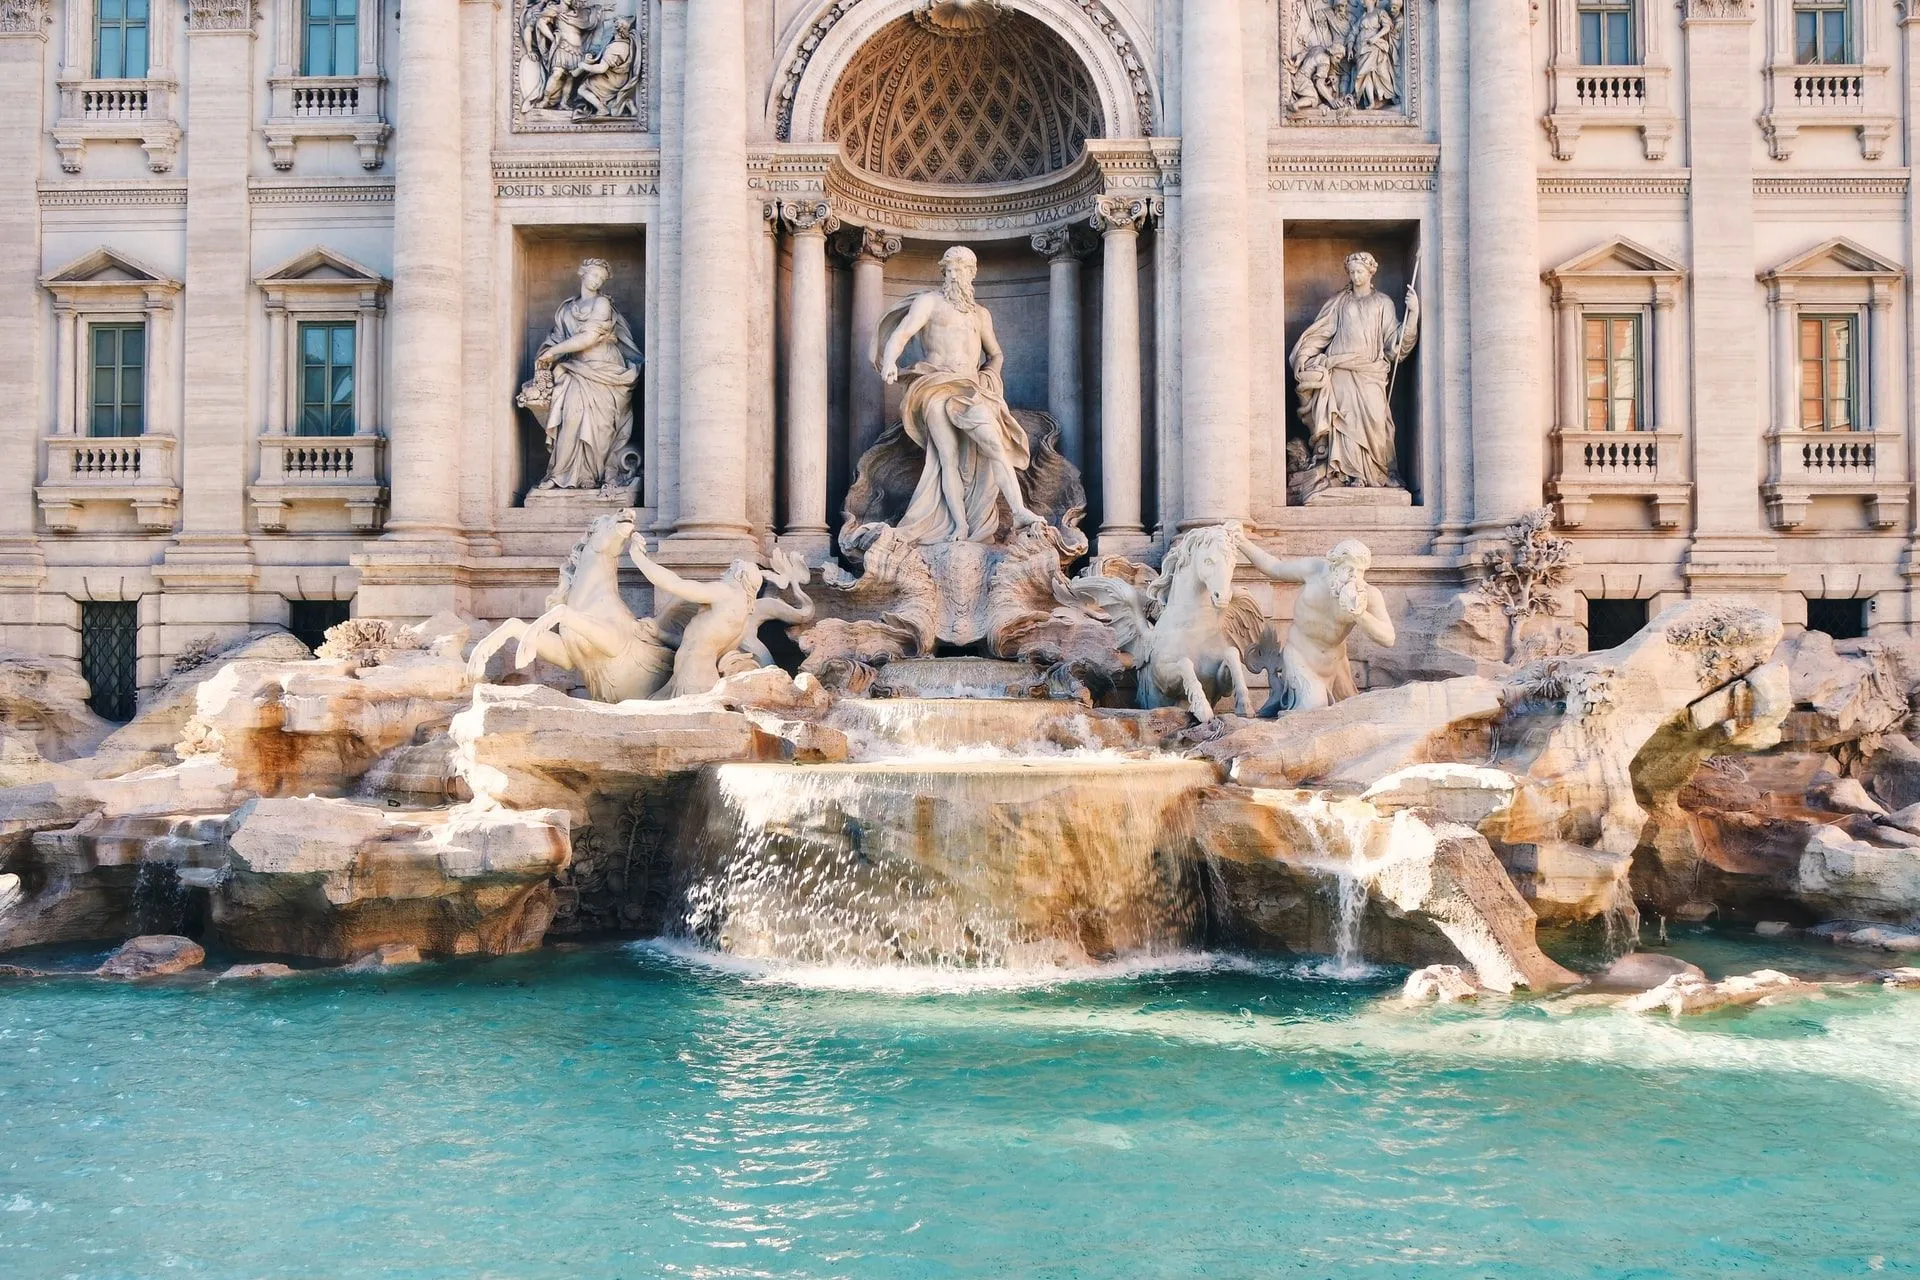 Water fountain in front of intricate roman statues